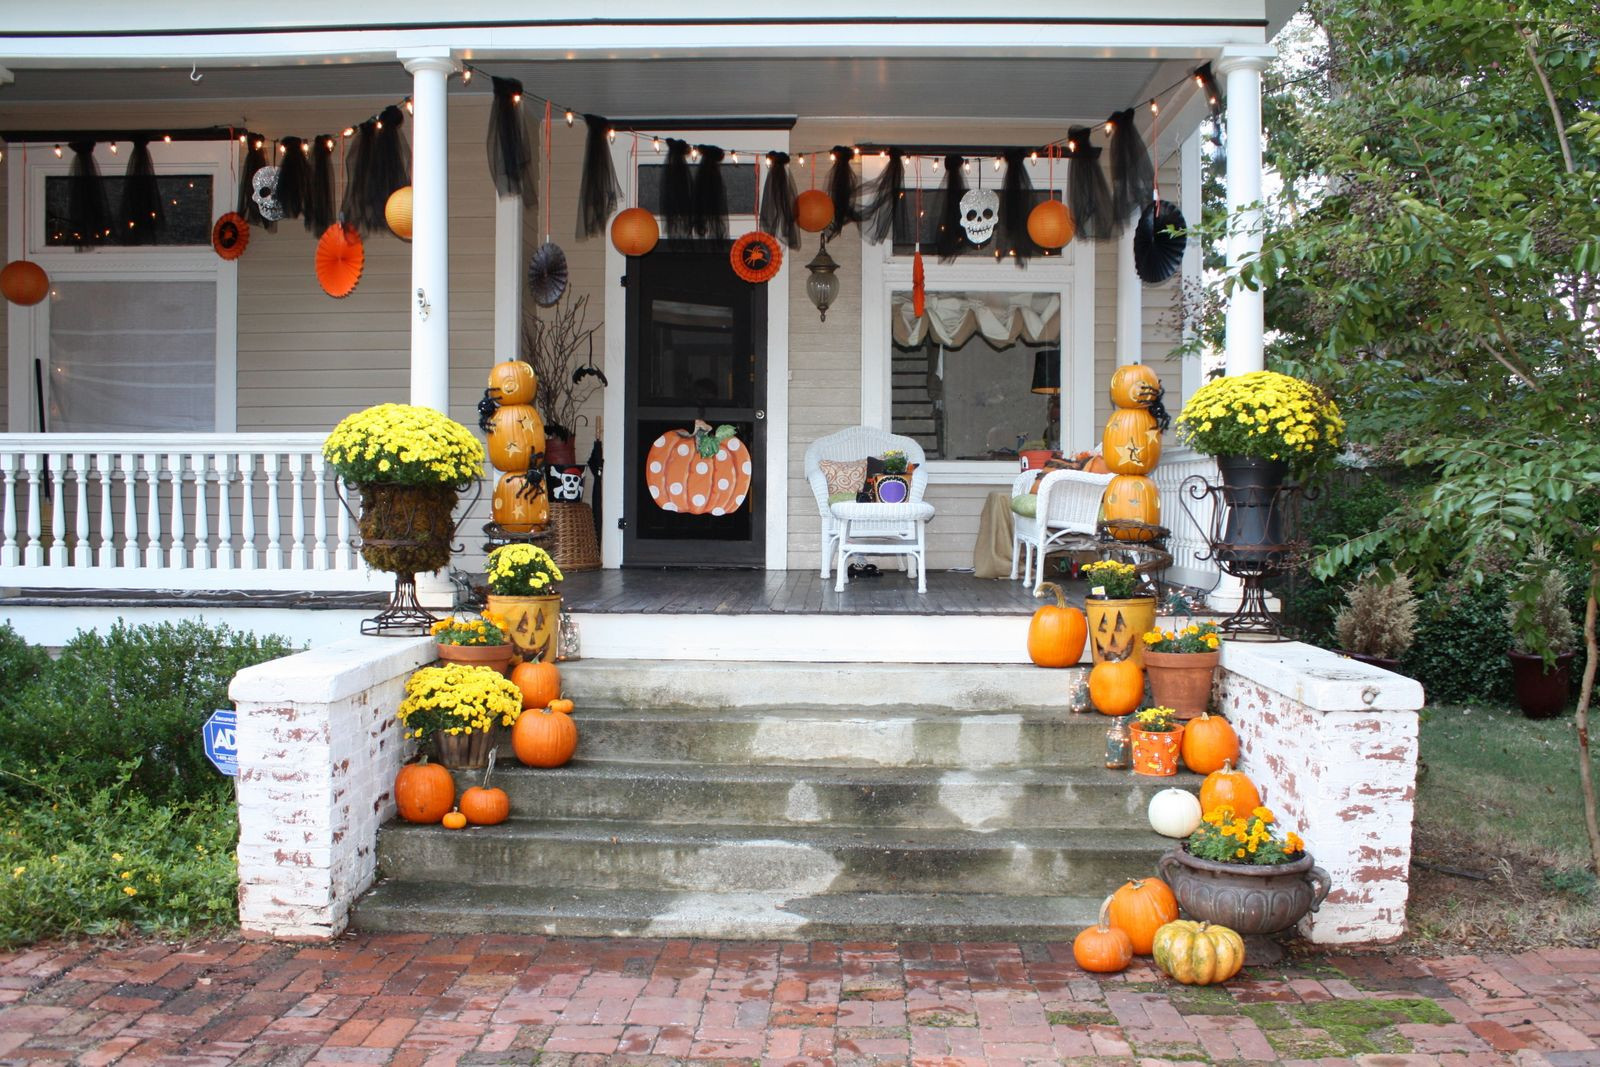 Halloween Porch Decorating Ideas
 Our Southern Nest Whimsical Halloween Decorations